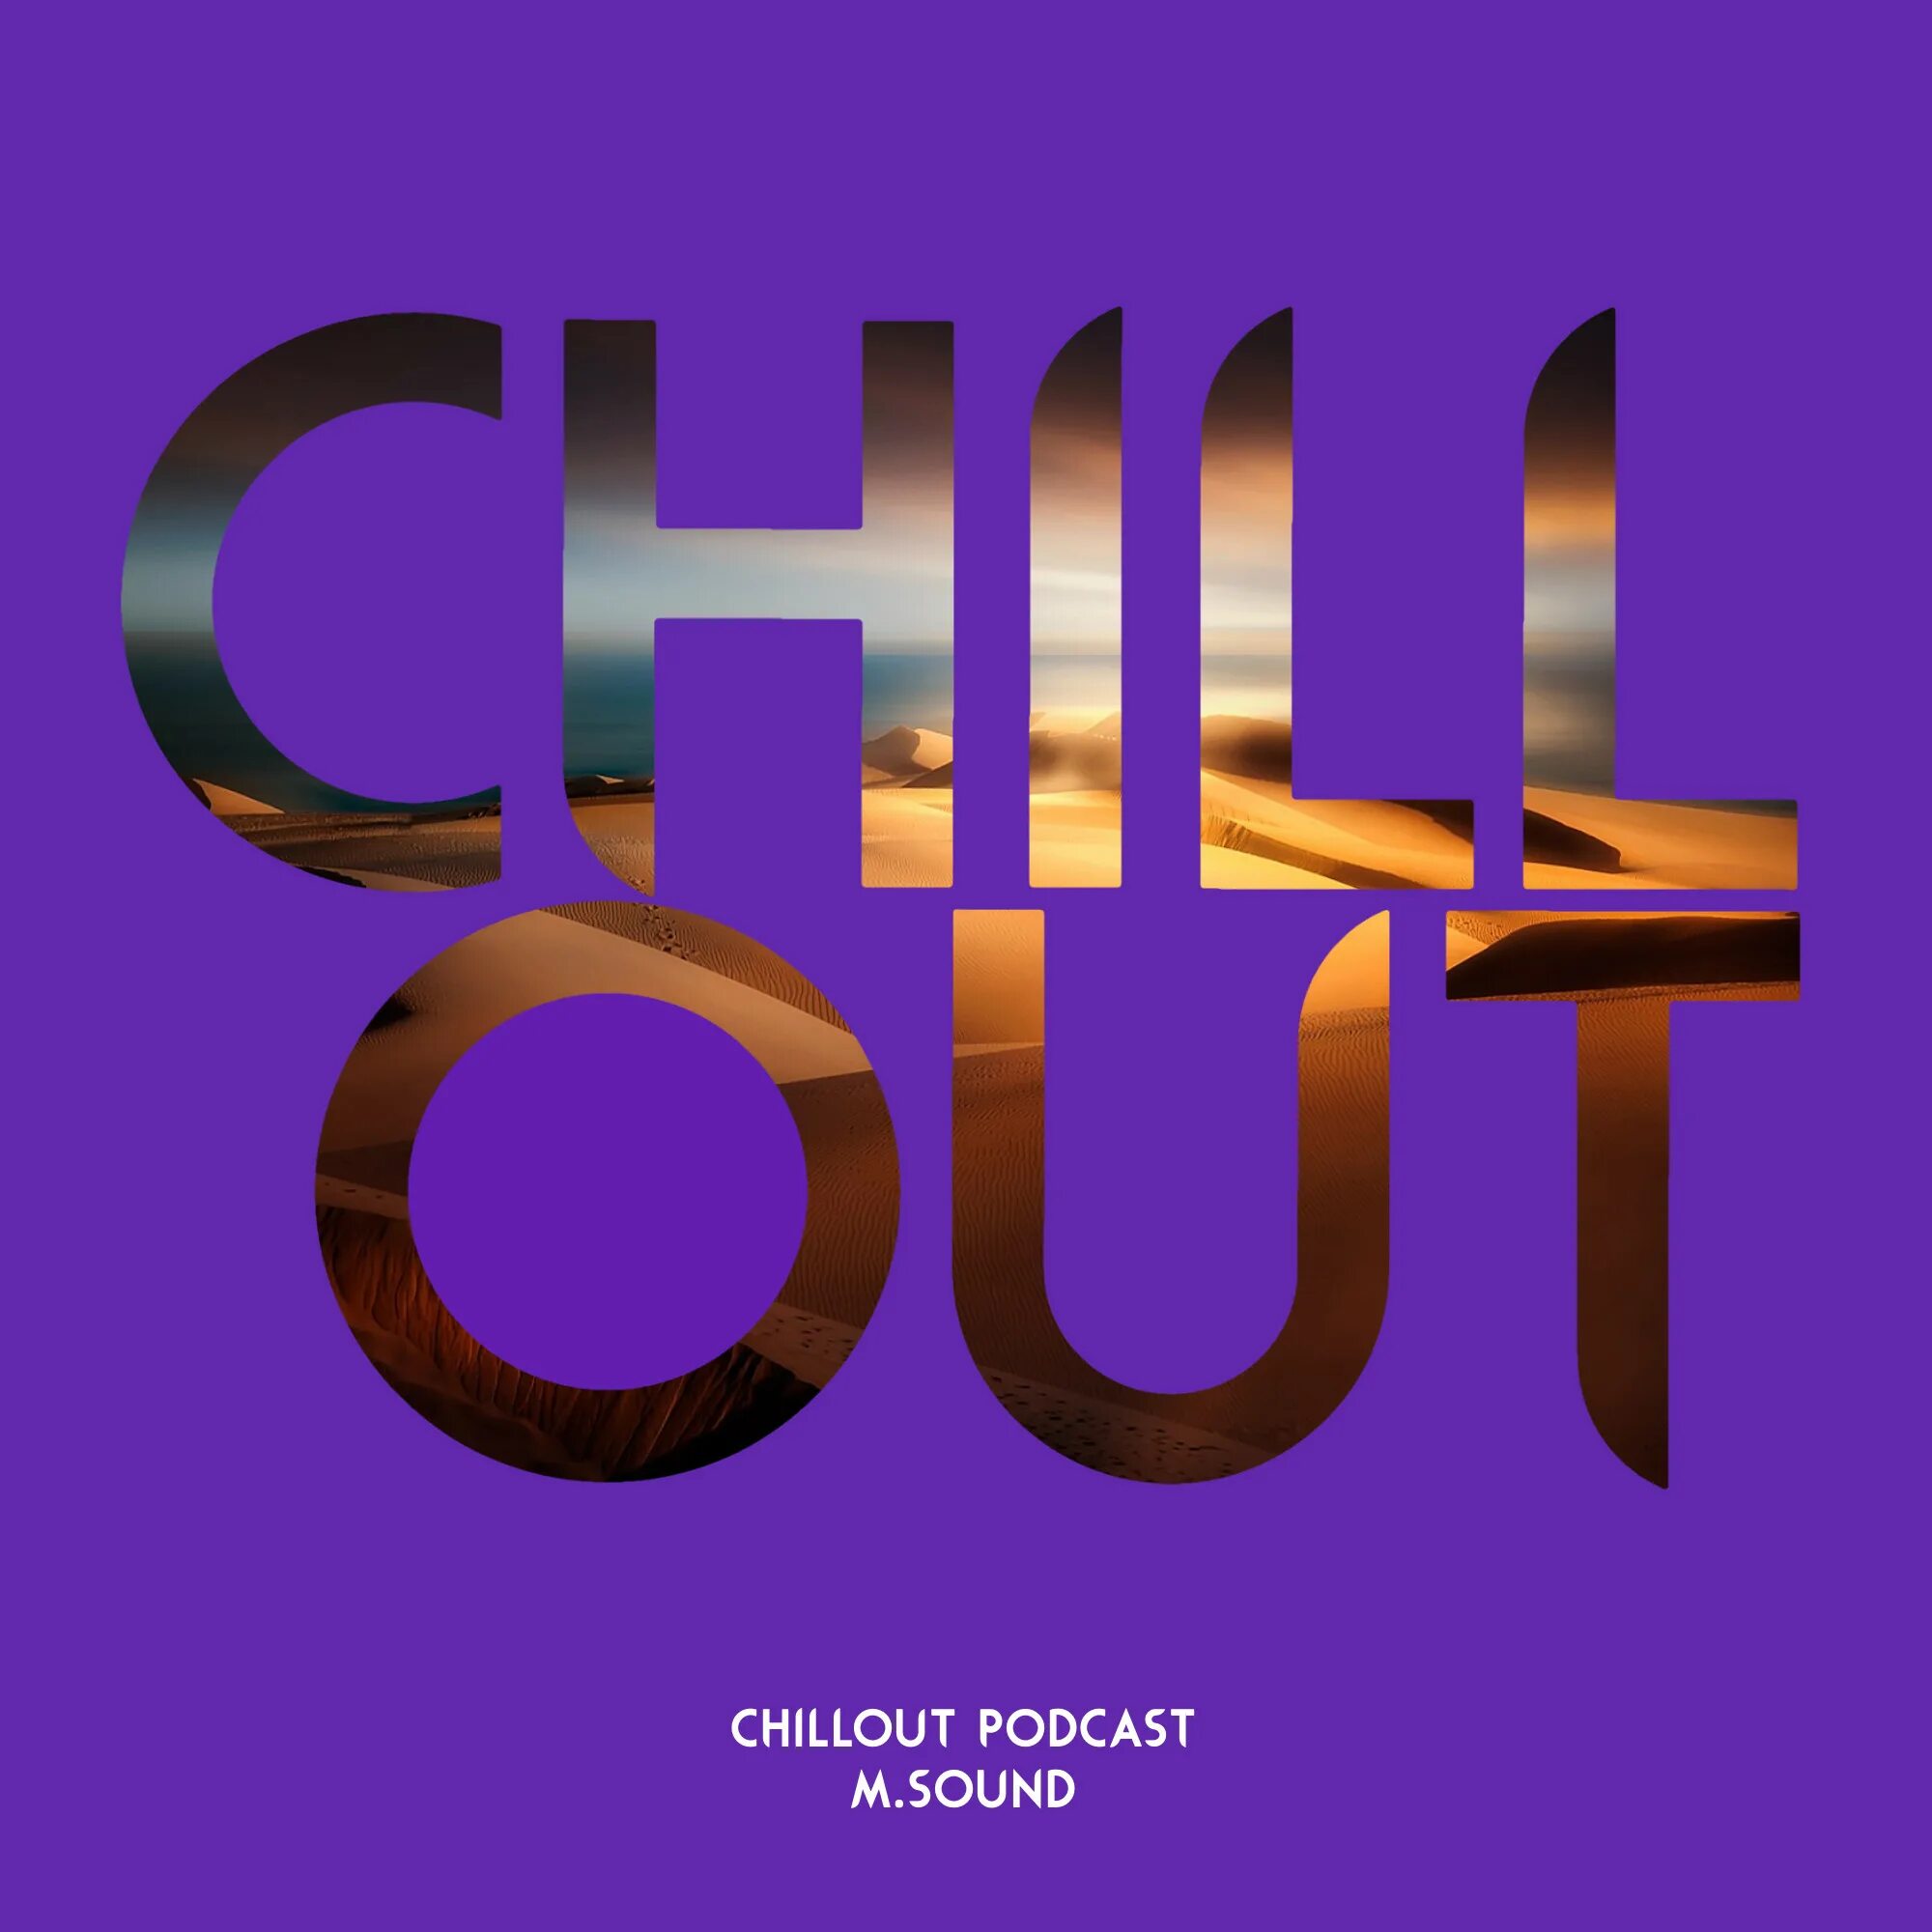 Chillout подкасты. Chillout картинки. Chillout обложка альбома. Баннер Chillout. Stand chillout